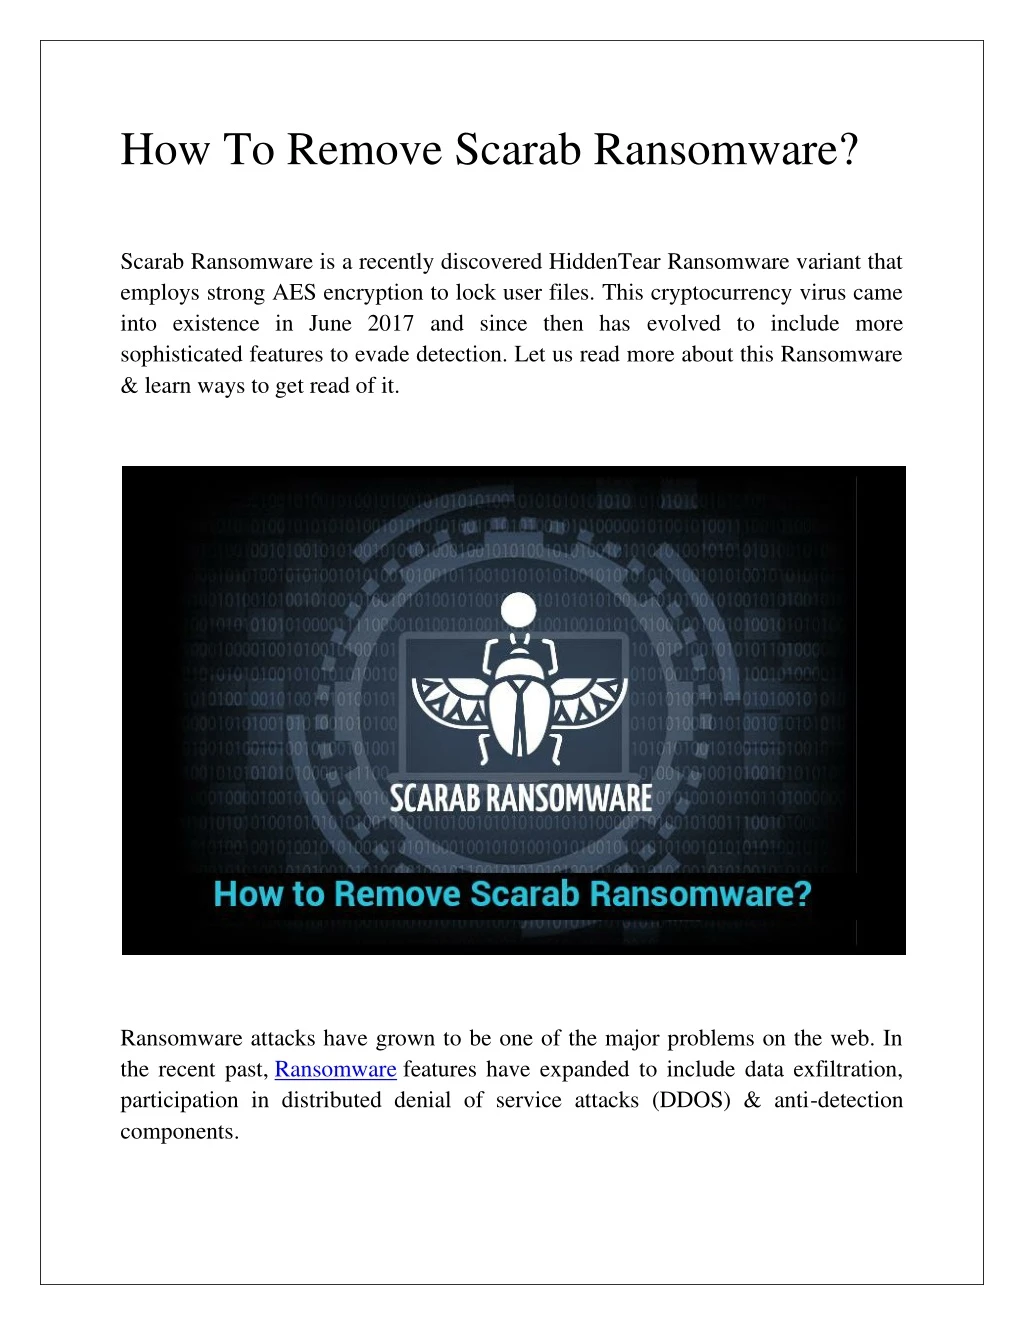 how to remove scarab ransomware